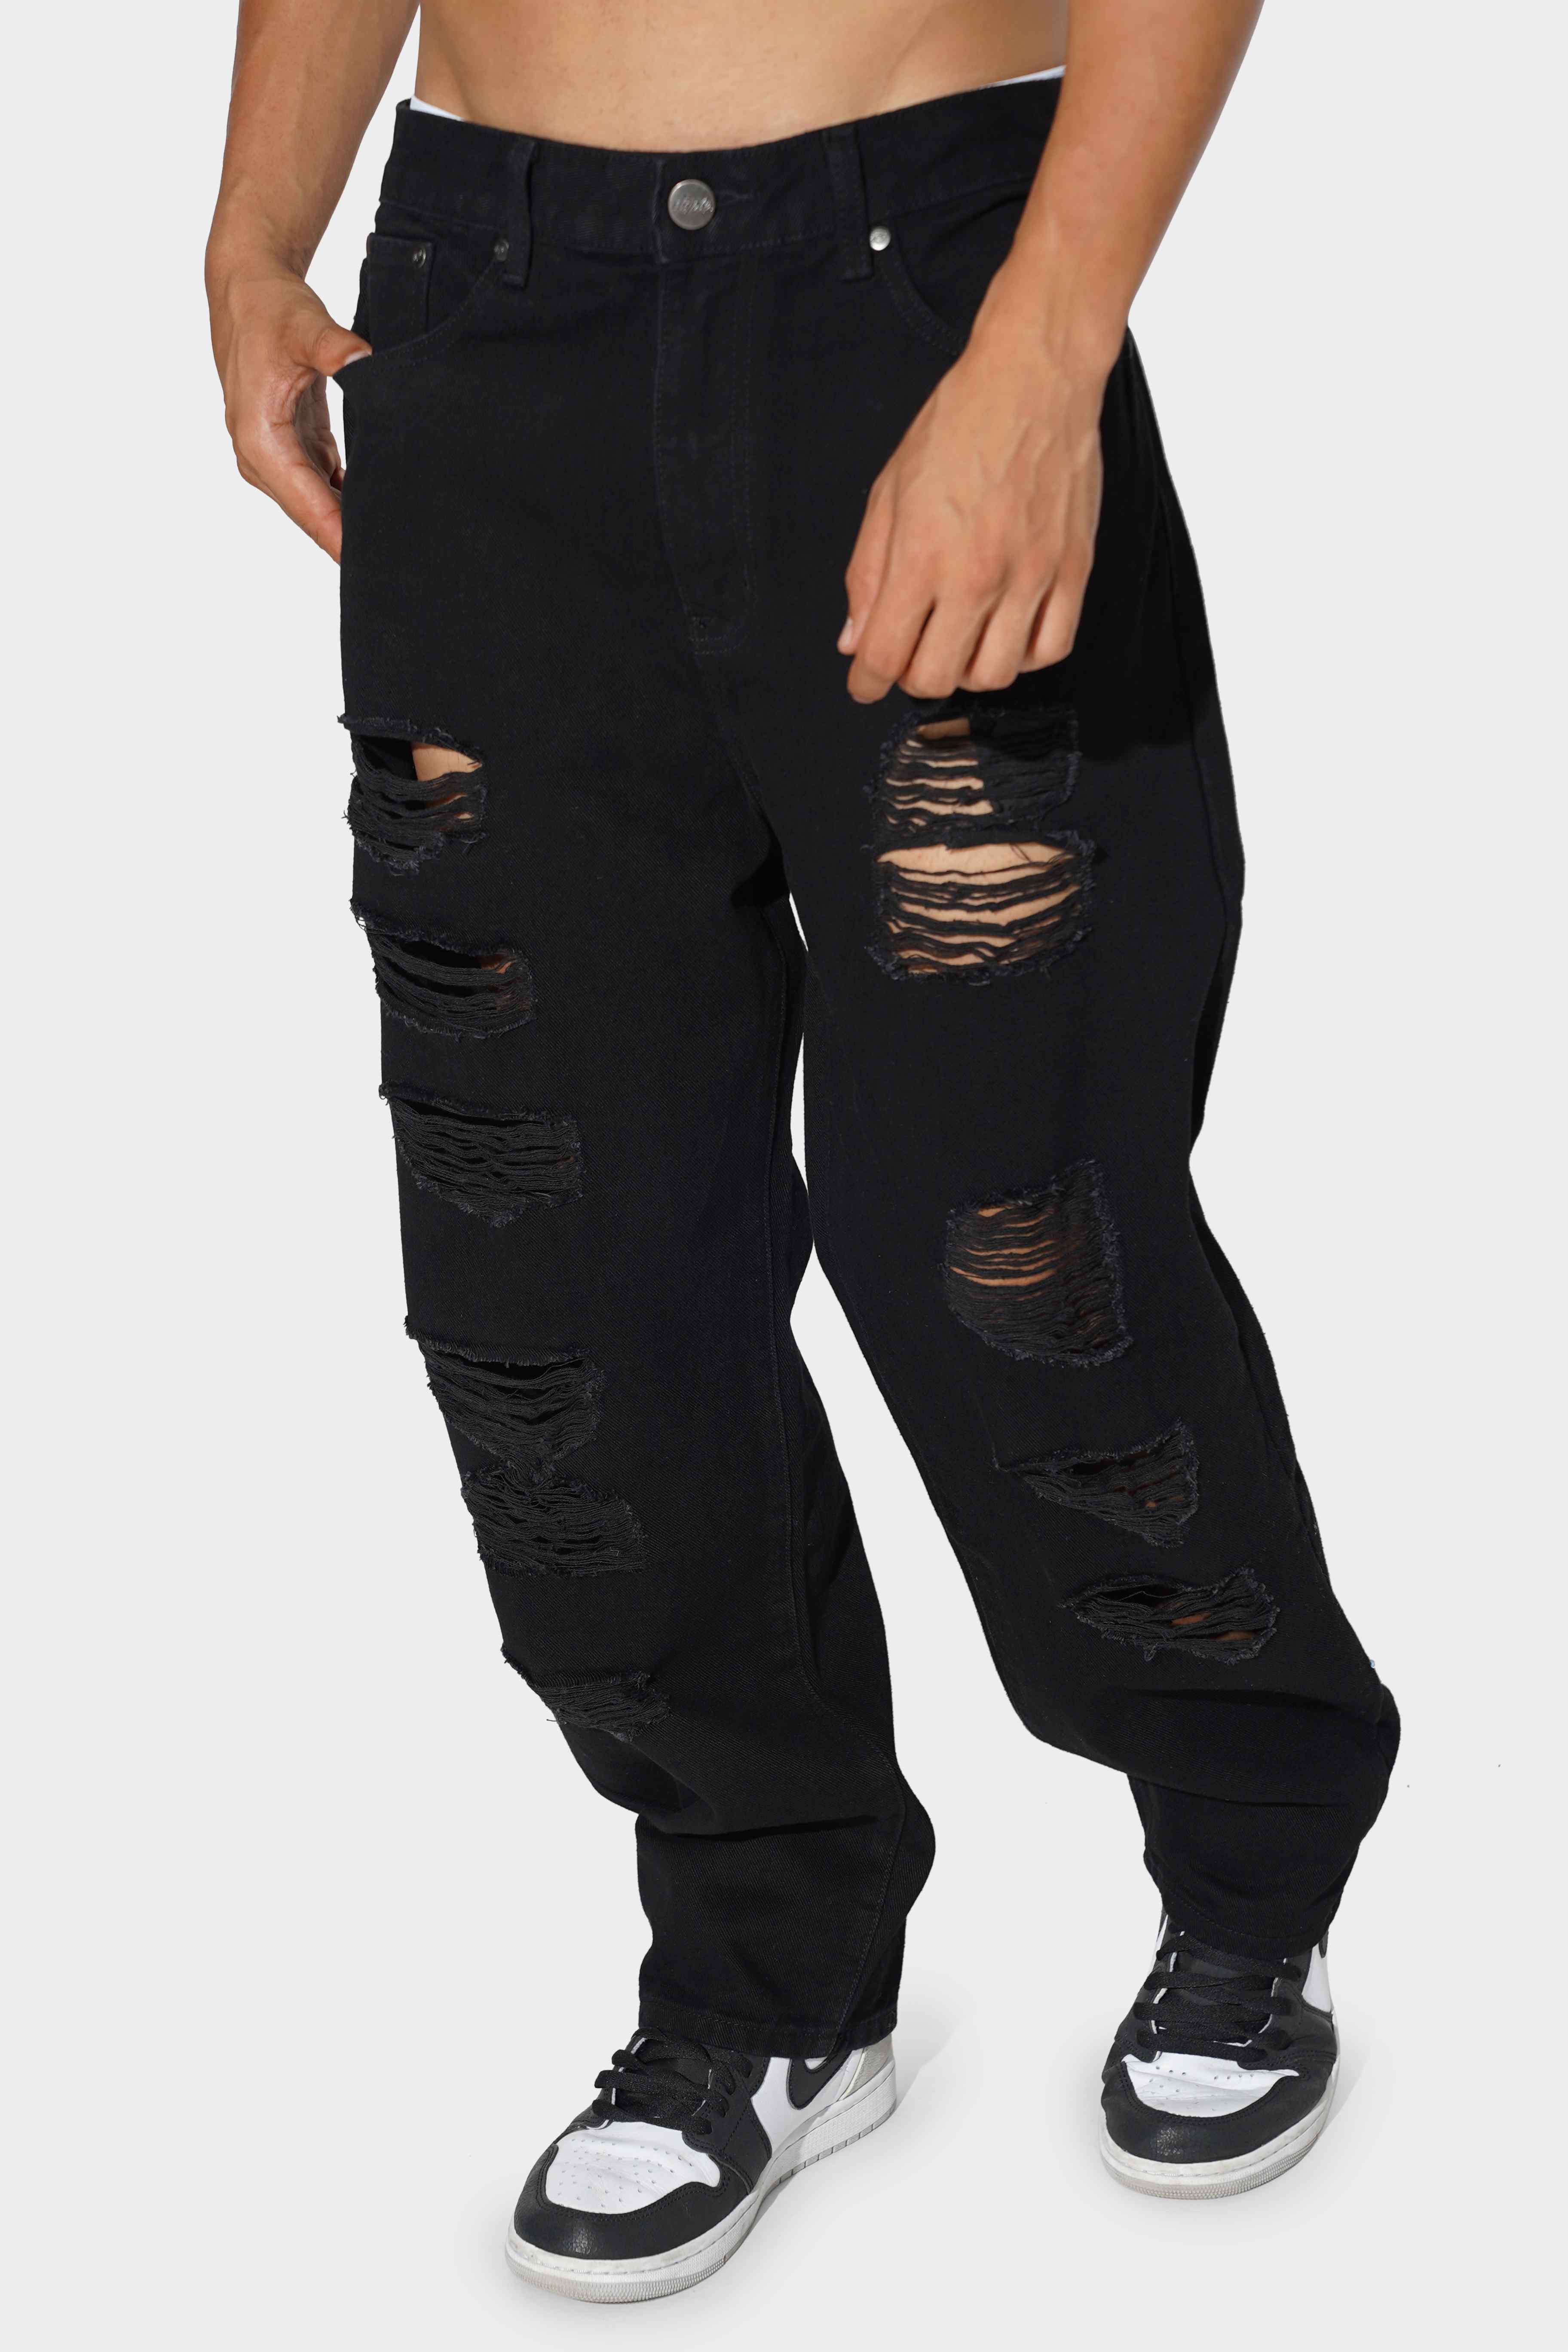 Staple Distraught Baggy Jeans Black